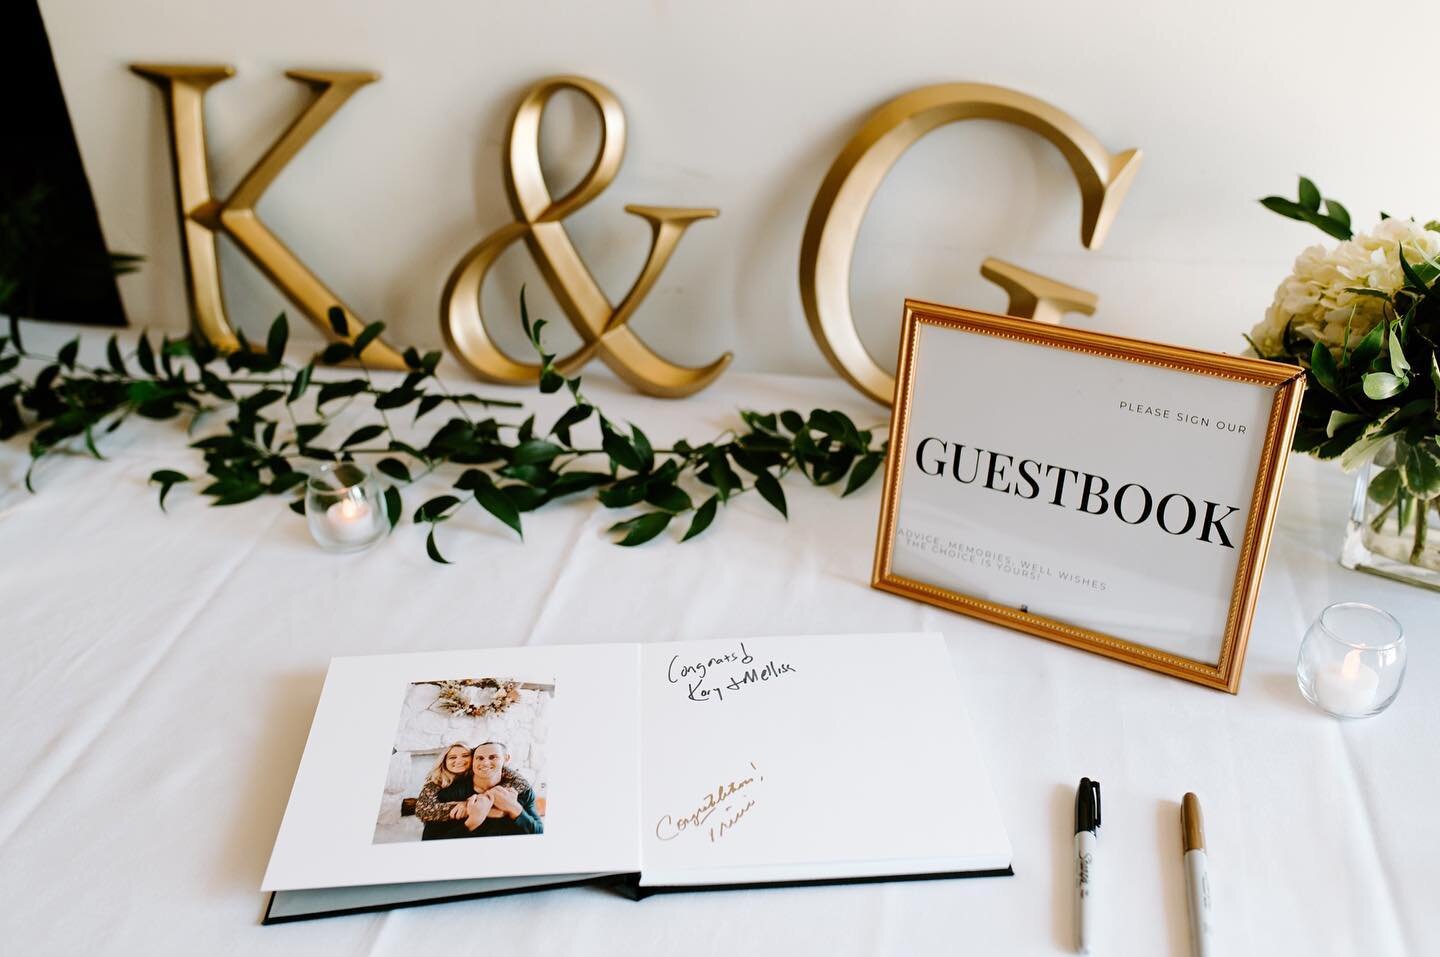 K&amp;G&rsquo;s personalized guestbook features photos from the first day they met until their wedding. Great way for their family &amp; friends to capture some of their life🤍👩🏼&zwj;🤝&zwj;👨🏻

📷: @marissakellyphotography 

#chicagowedding #Chic